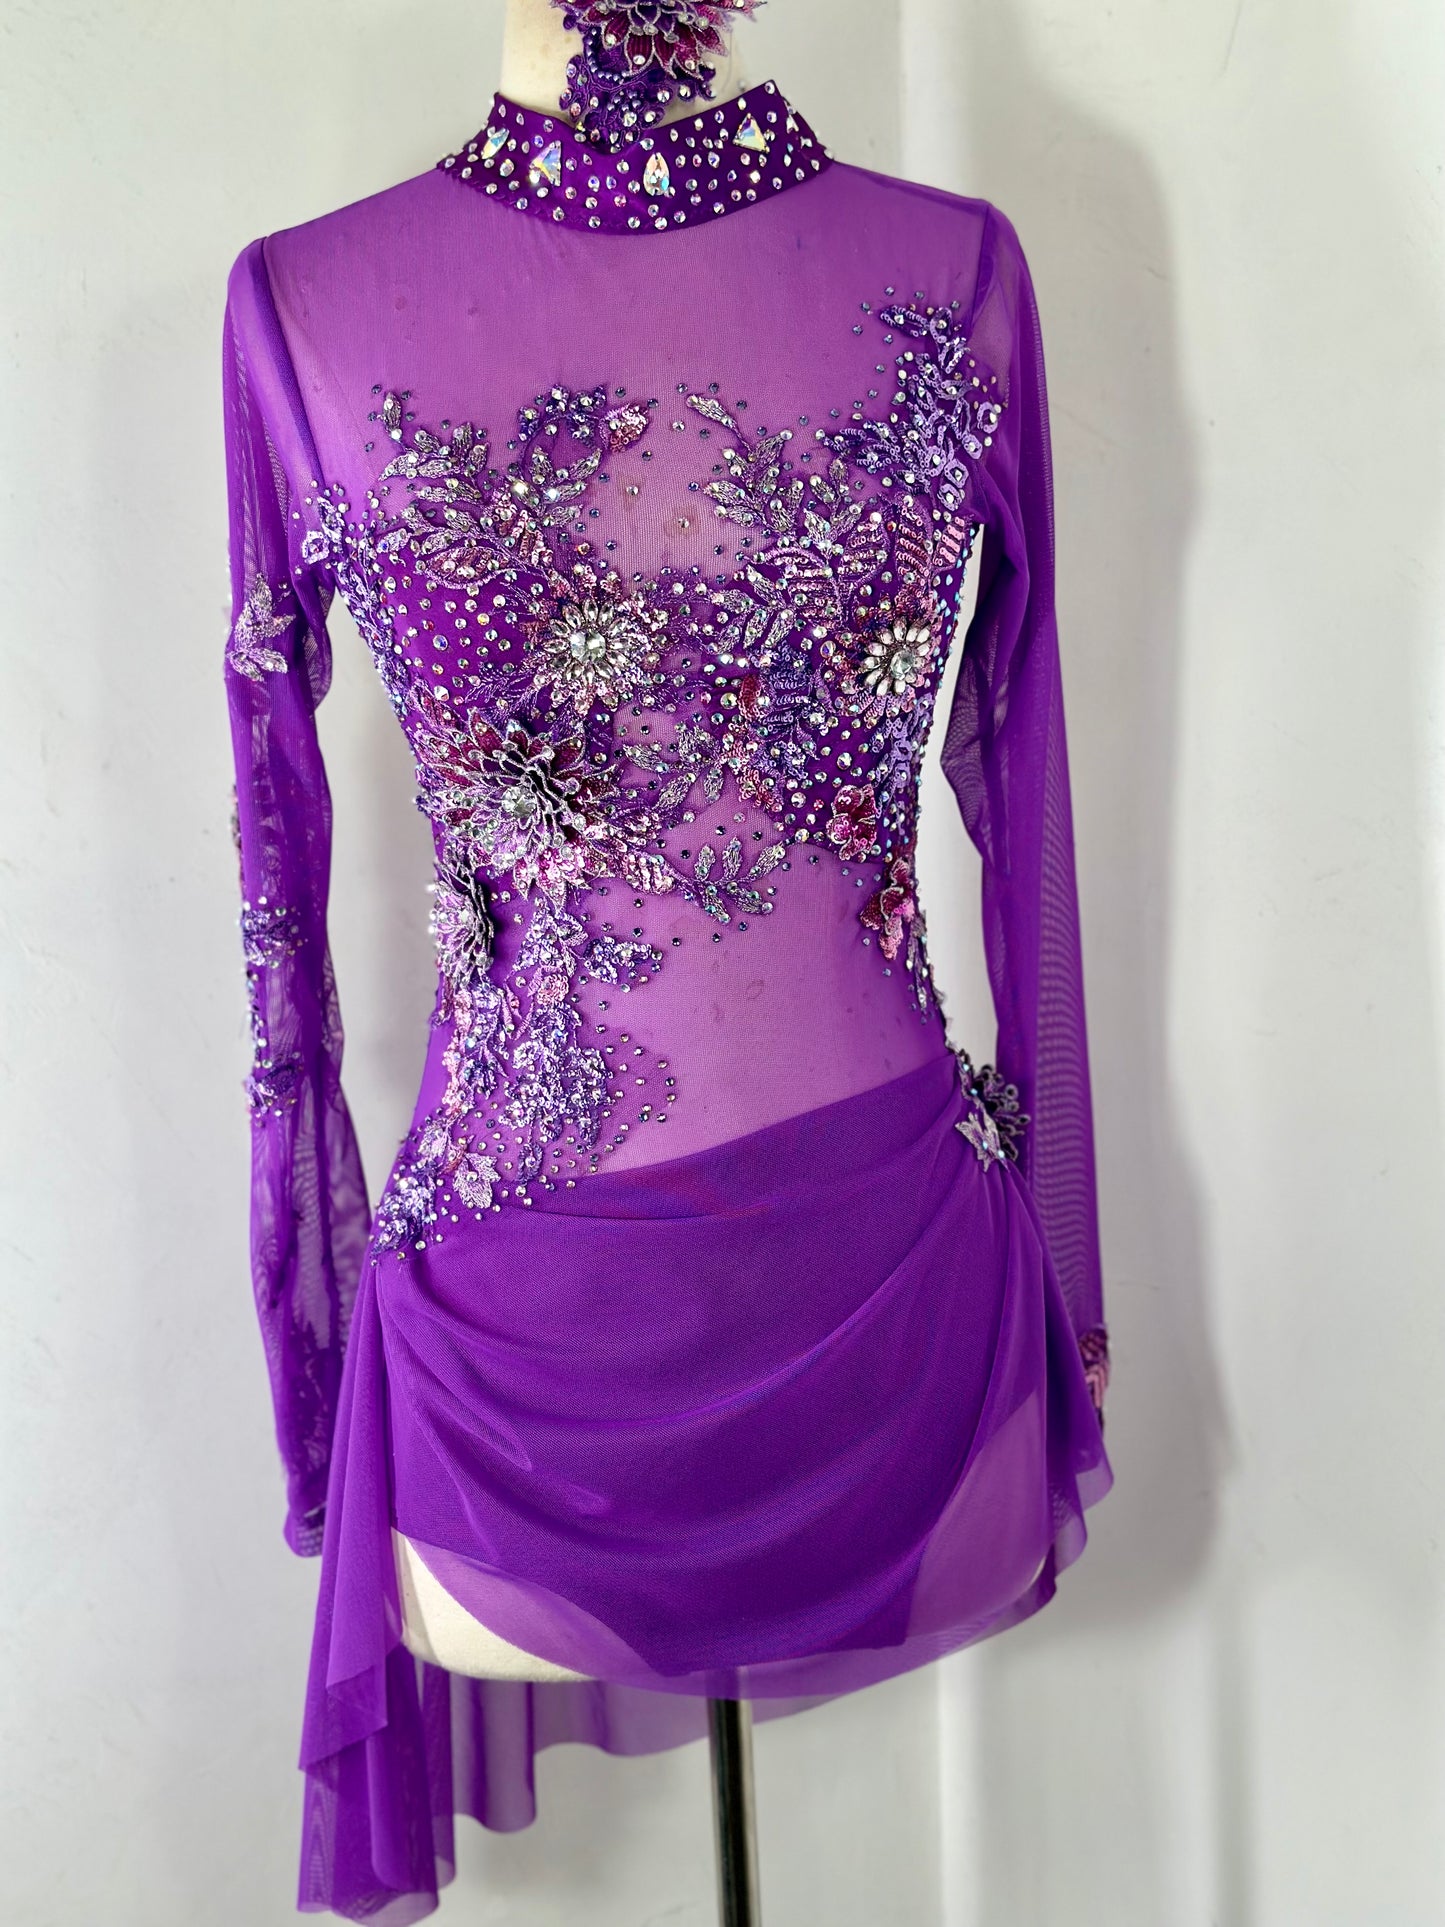 PLUM draped  dance costume with crystal ab stones and appliques